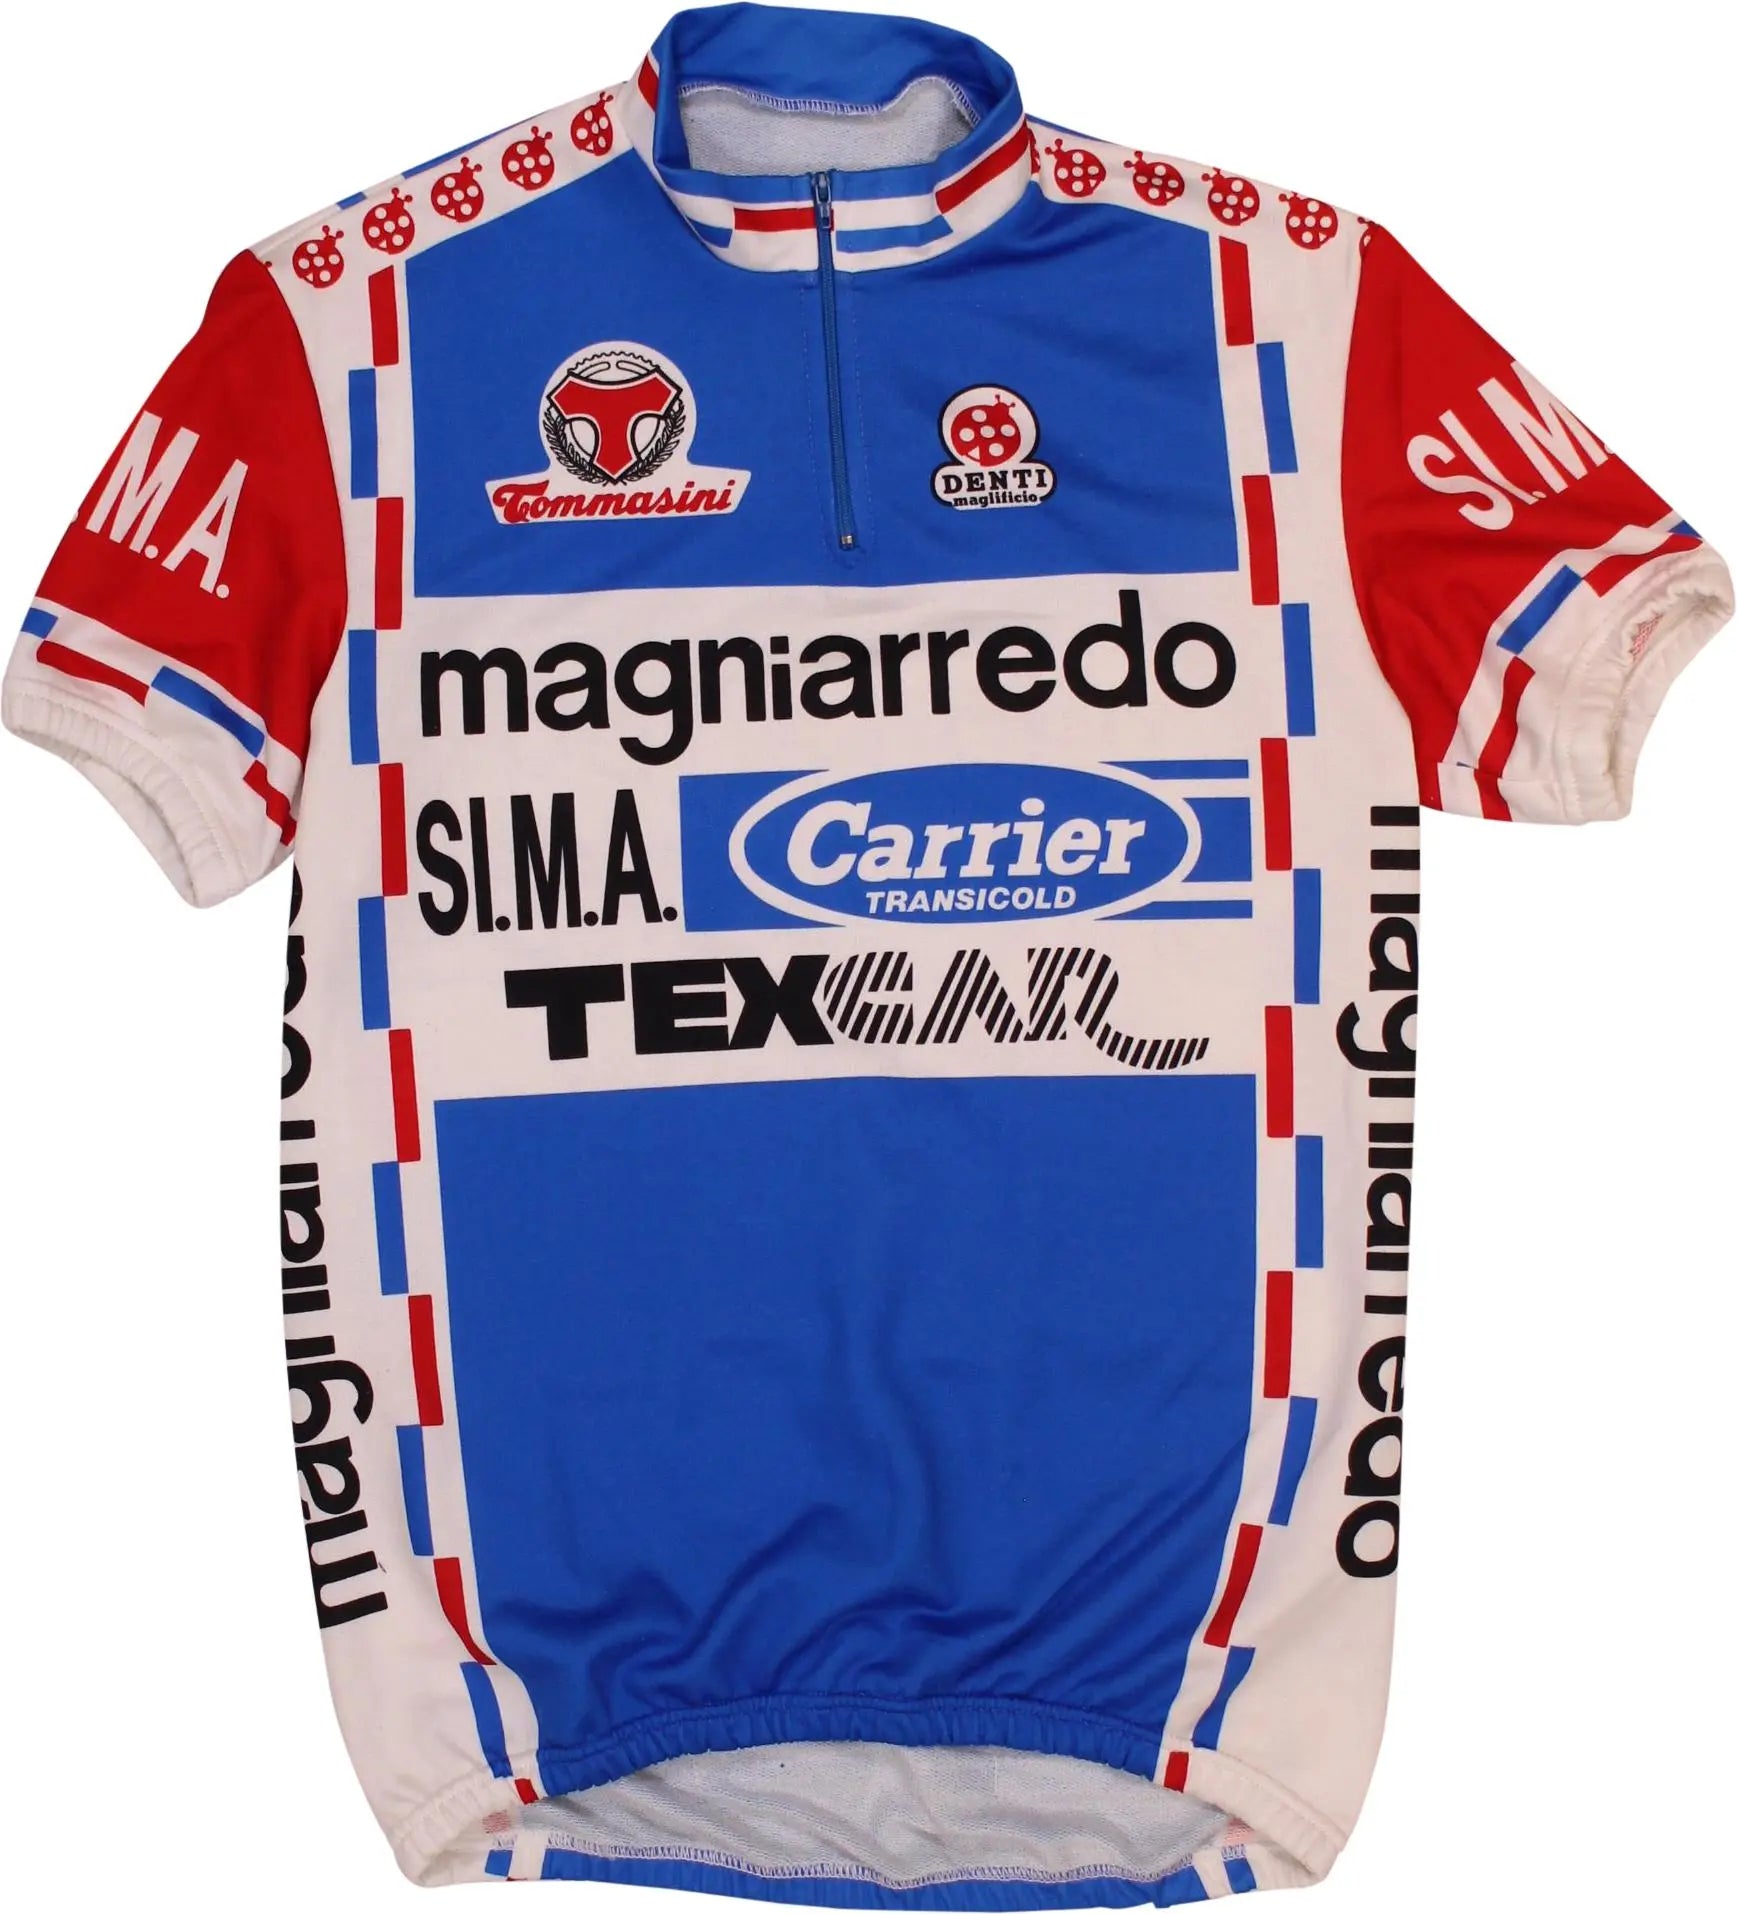 Magniarredo - 86s/87s Cycling Shirt- ThriftTale.com - Vintage and second handclothing